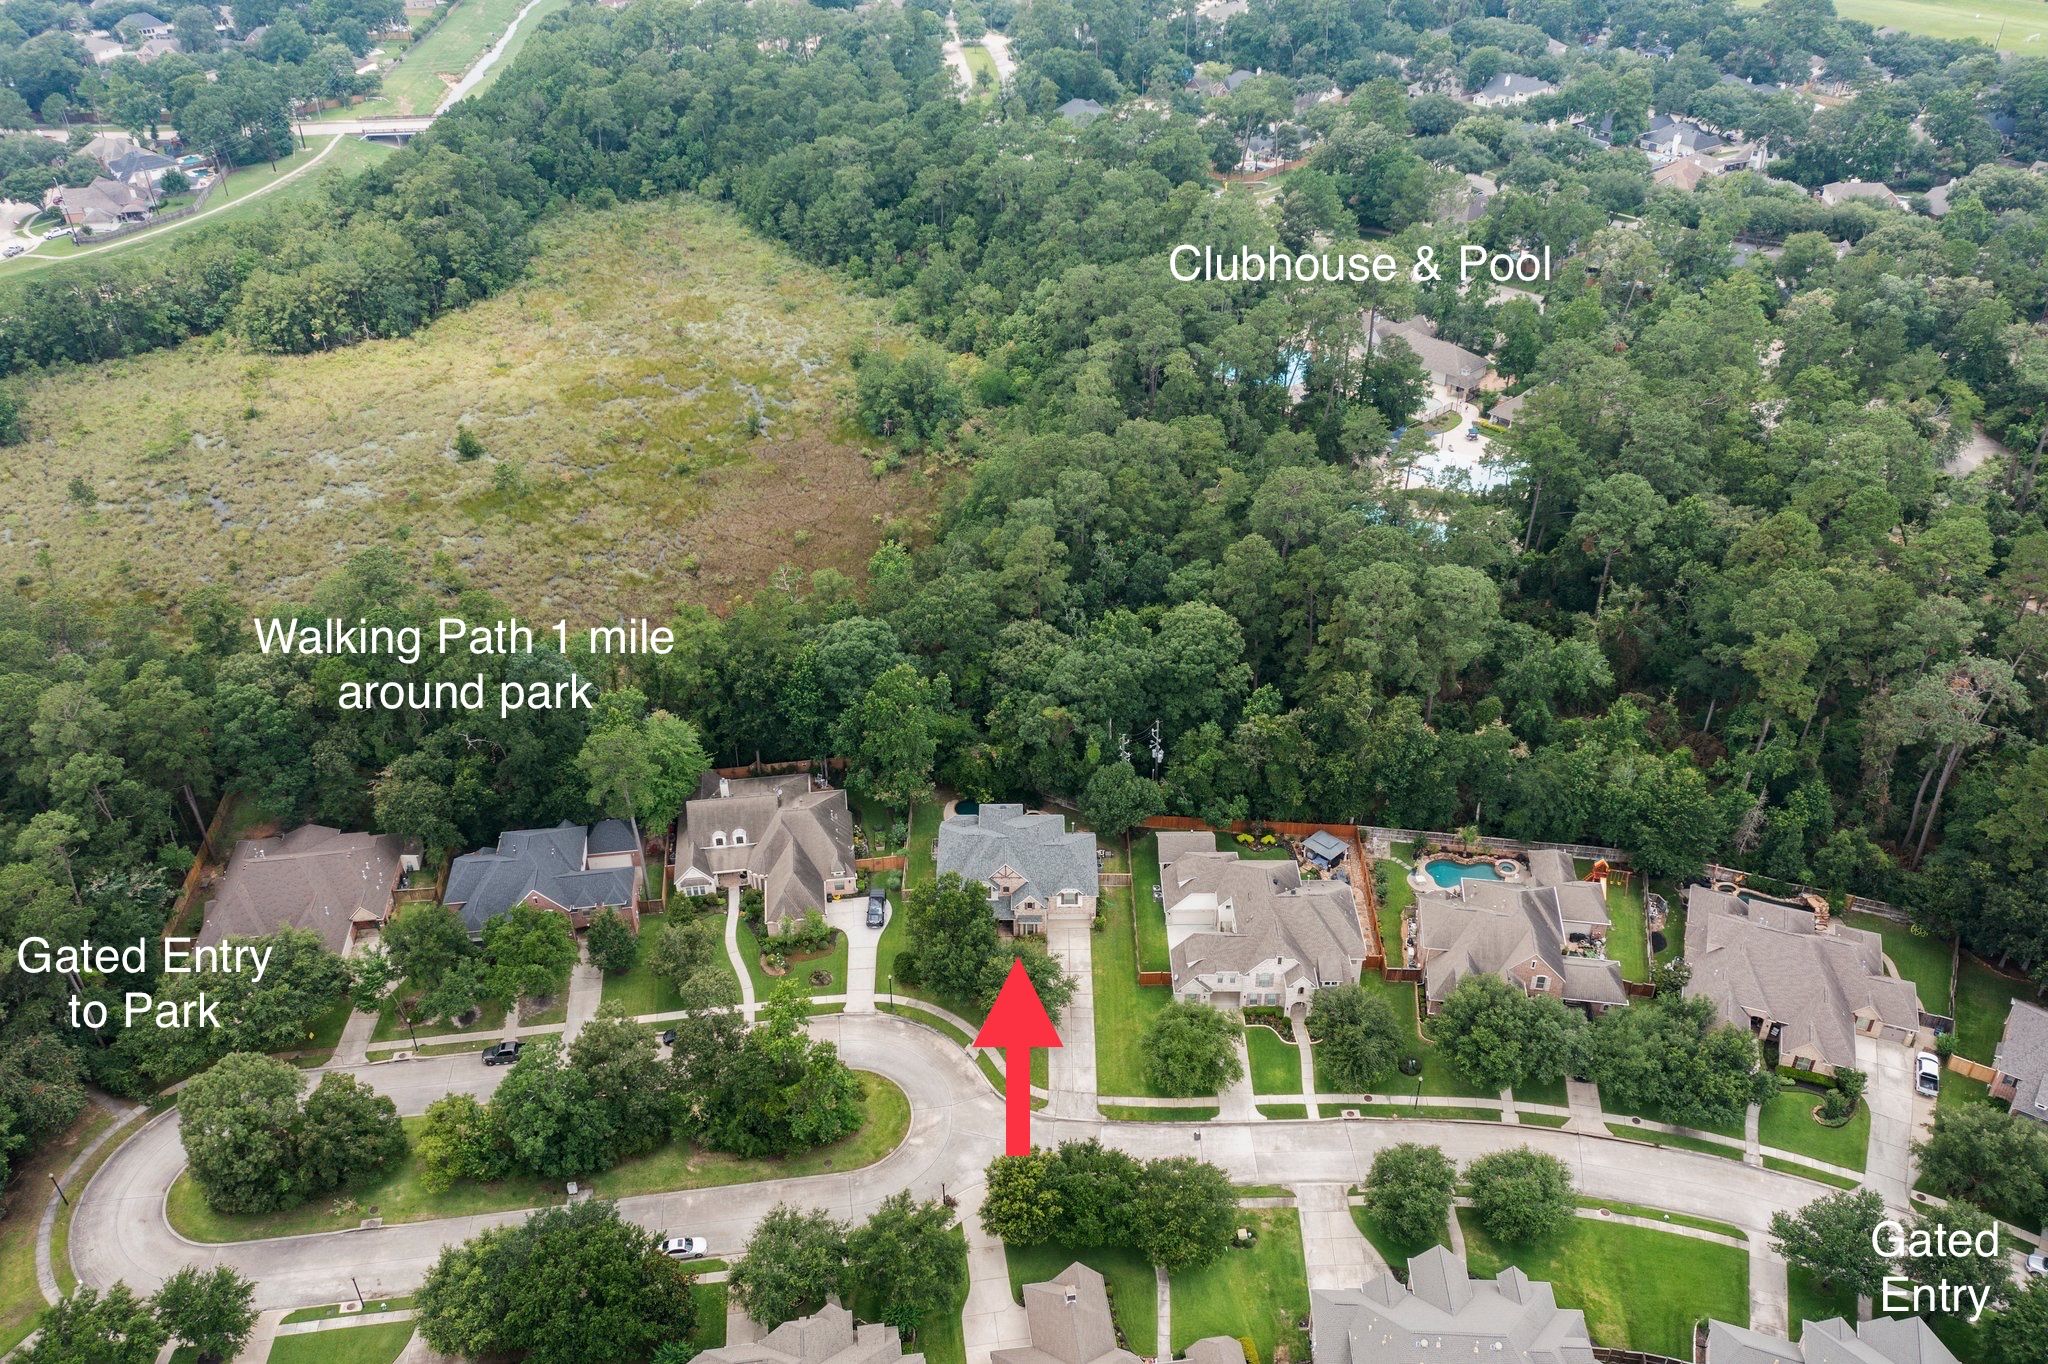 Another aerial view with home location, gated entries, walking path, and clubhouse.